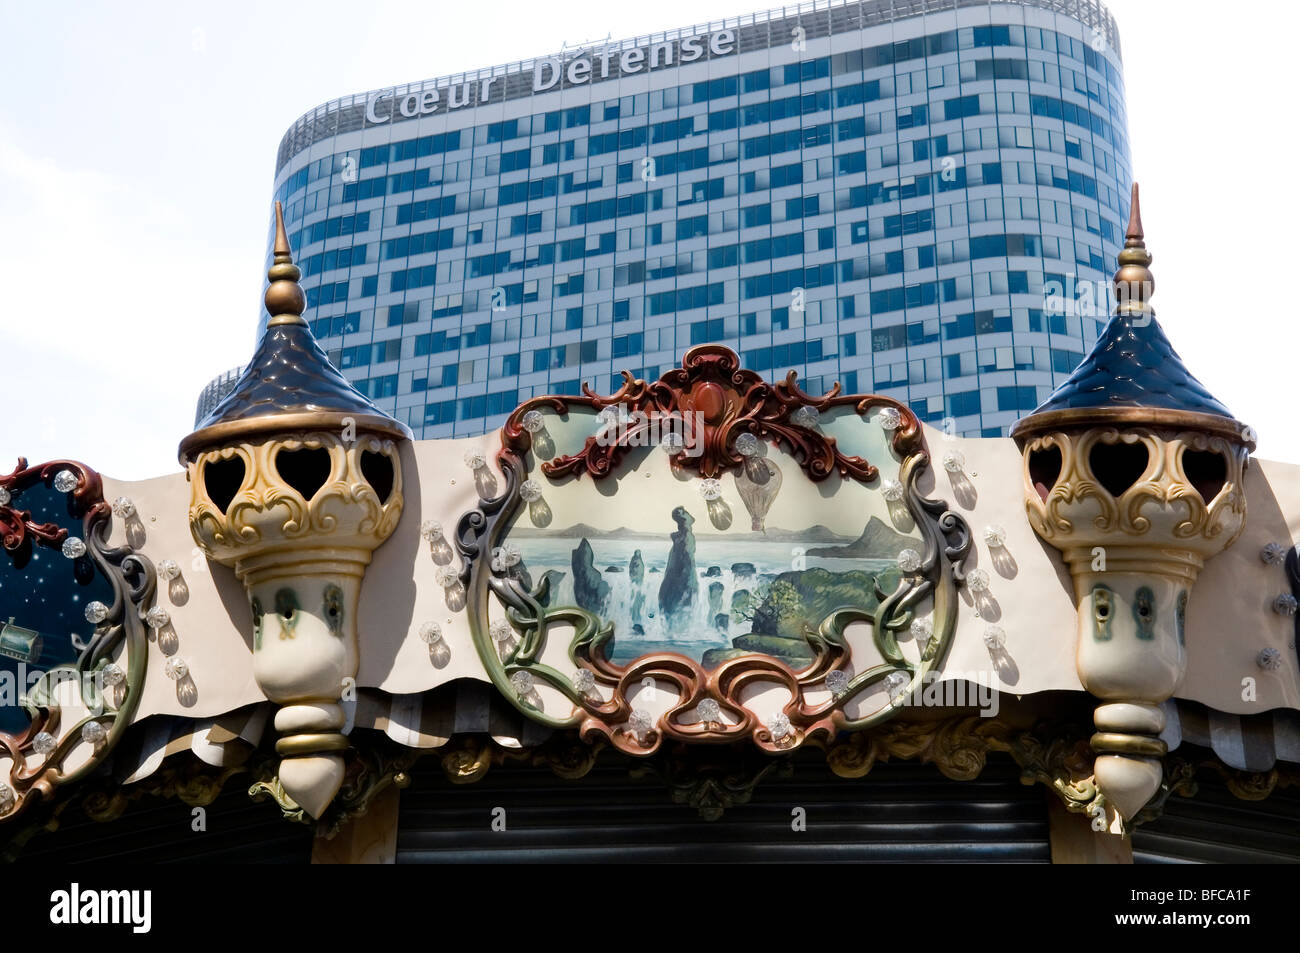 Top of a merry-go-round in front of a modern building - la Defense - Paris - France Stock Photo